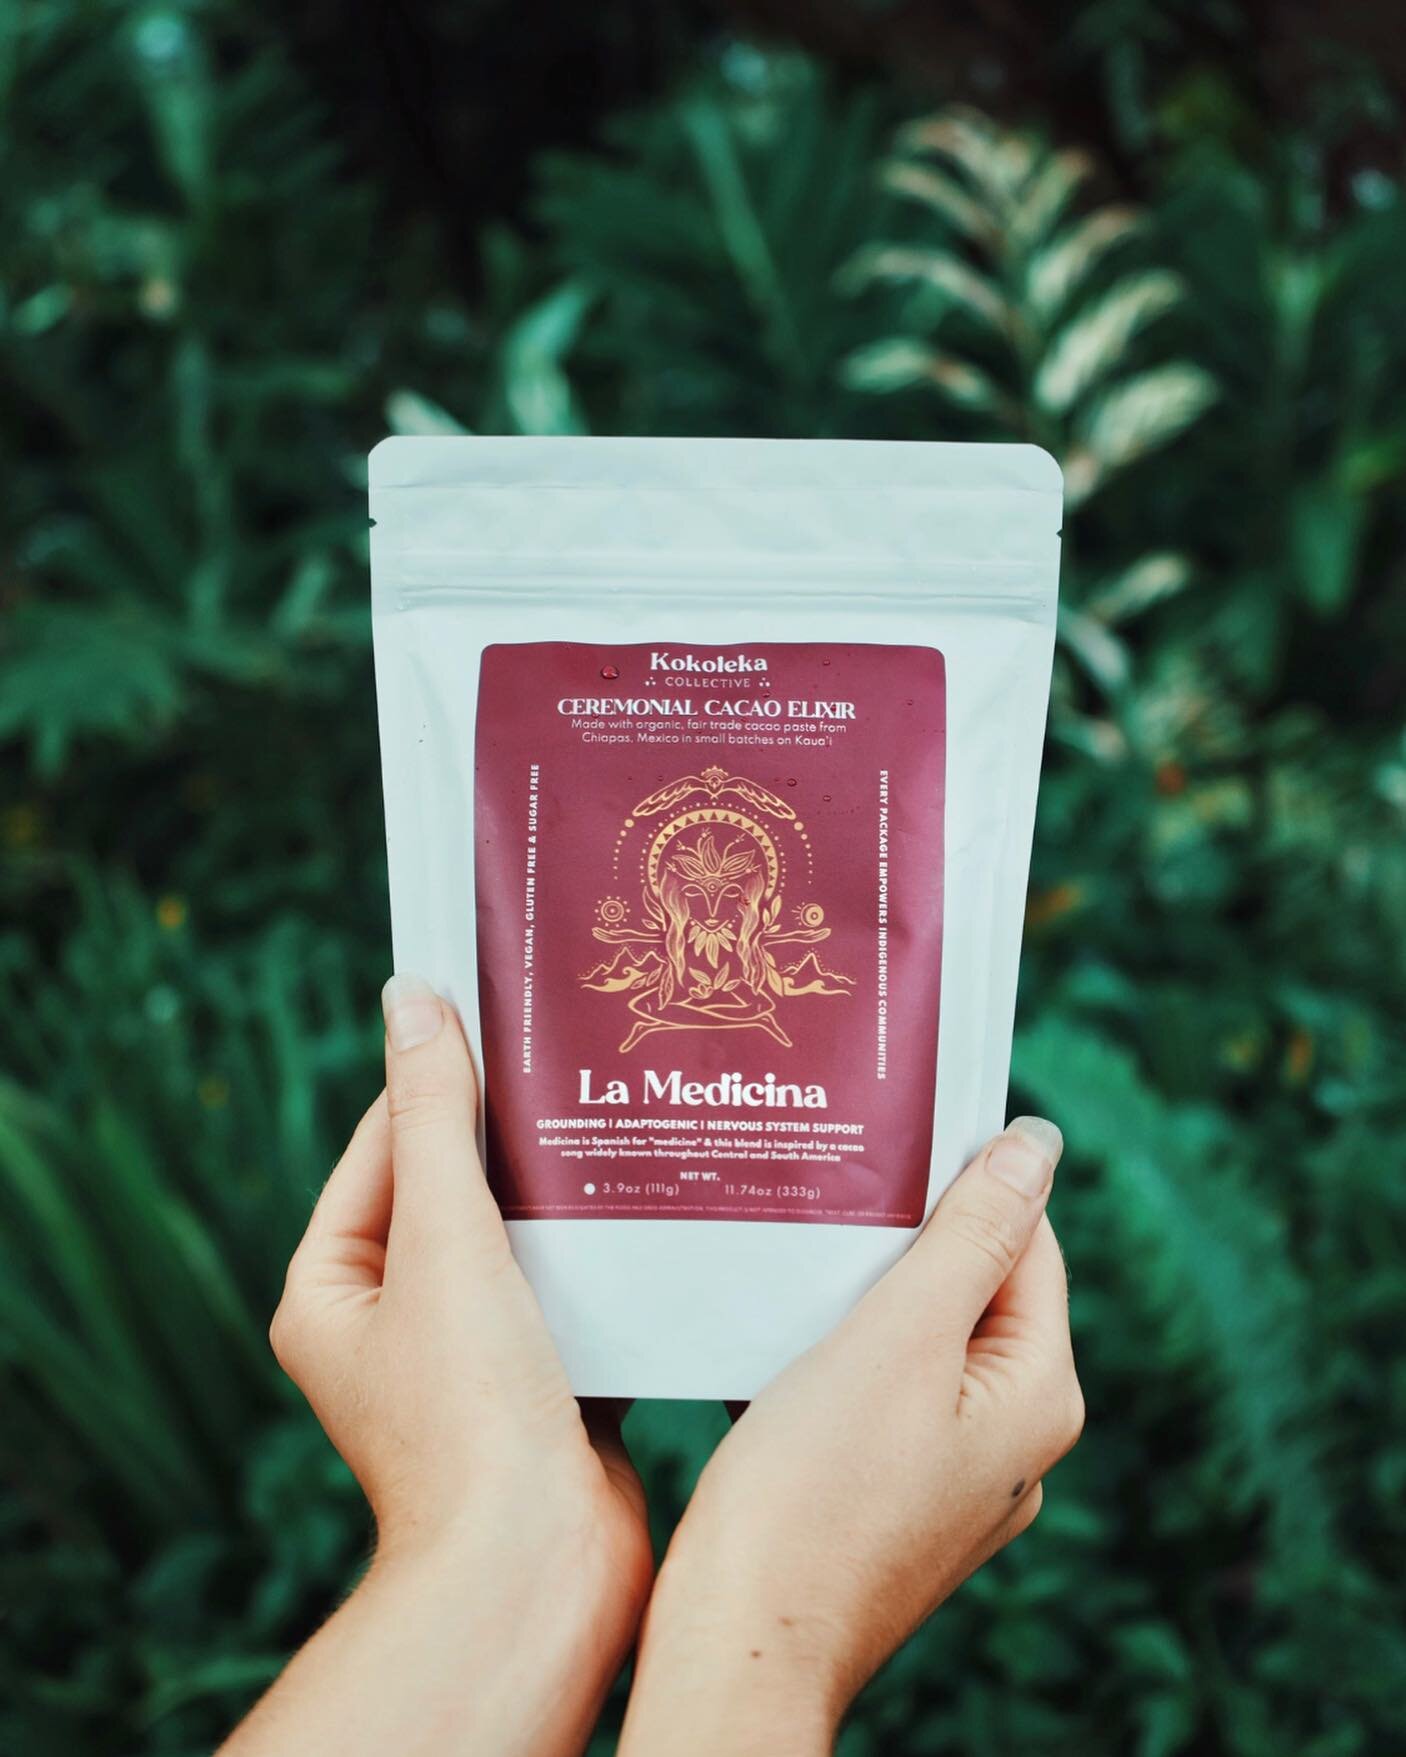 Psssttt have you all heard? Our recipe for our La Medicina elixir blend is evolving &amp; upgrading!

The recipe now includes:

🍫100% ceremonial grade cacao
🍄A blend of 14 different mushrooms (previously 6) including Reishi, Cordyceps, Chaga, Mesim